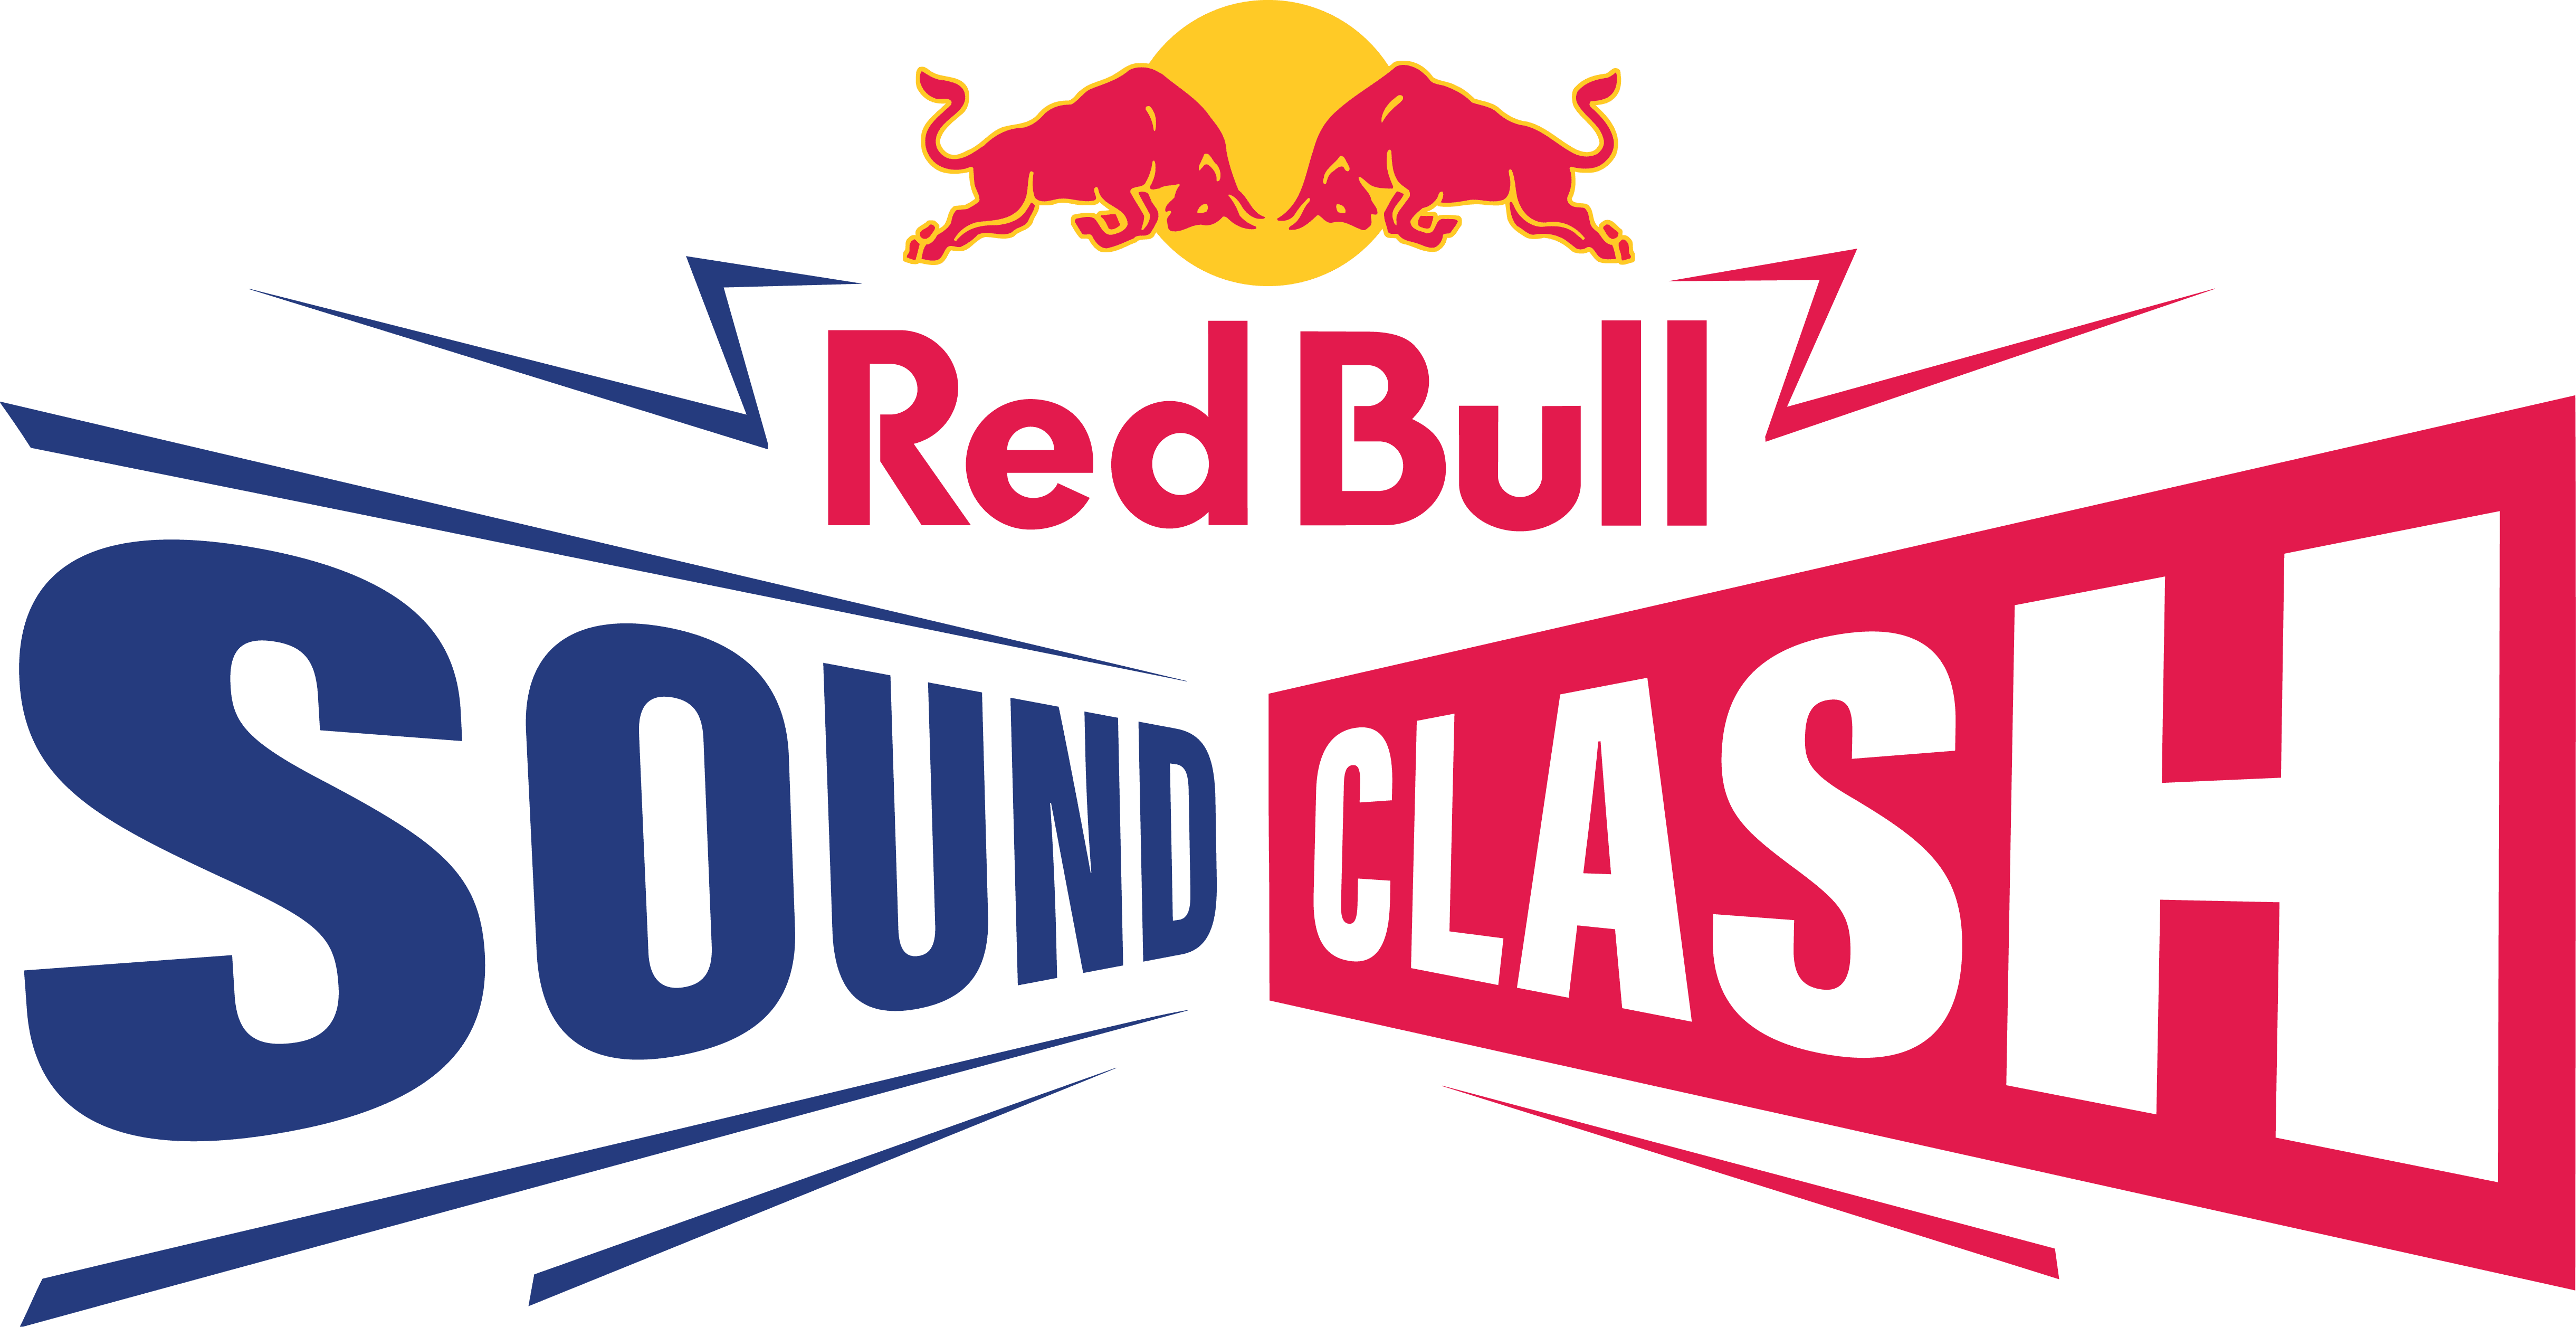 Red Bull SoundClash Returns to the USA